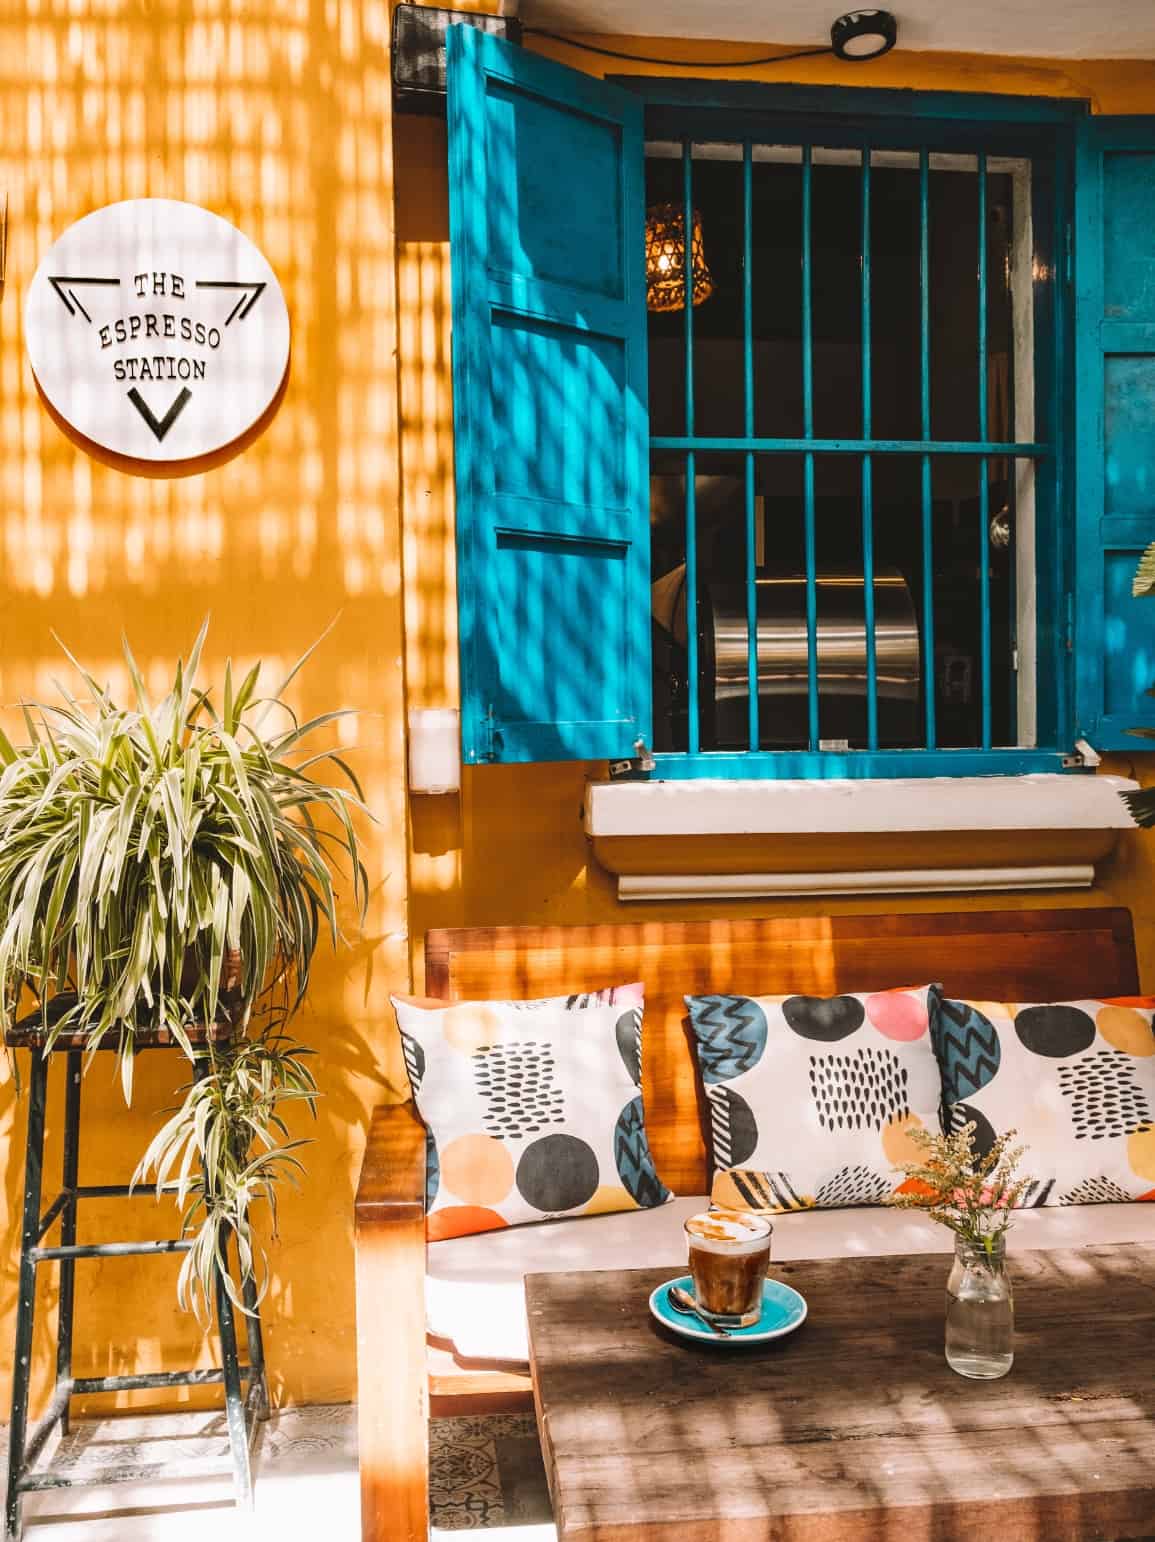 The outdoor patio of The Espresso Station coffee shop in Hoi An—the walls are bright yellow and the shutters are bright blue. 